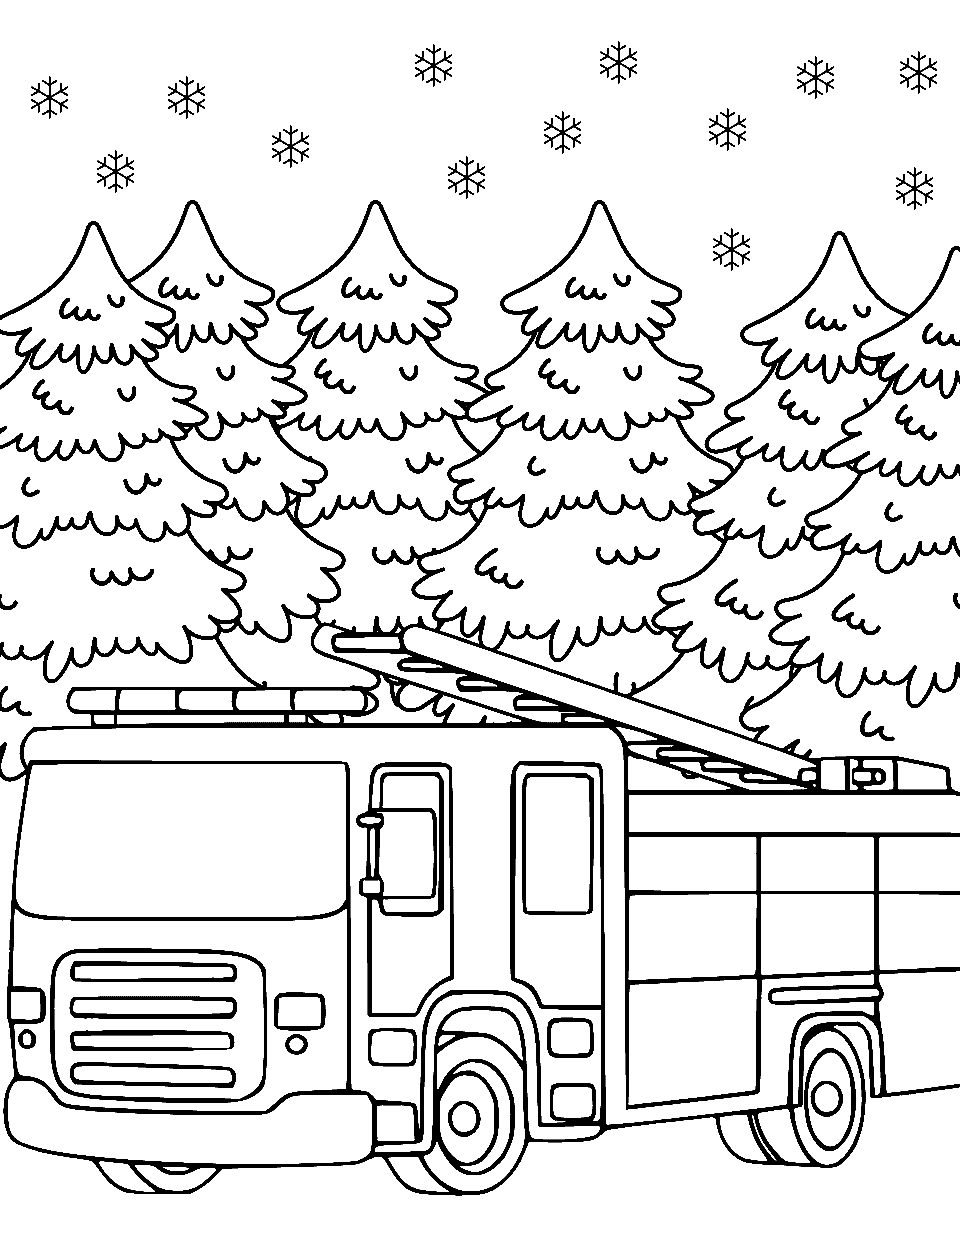 Winter Firefighting Fire Truck Coloring Page - A fire truck in a snowy winter setting.